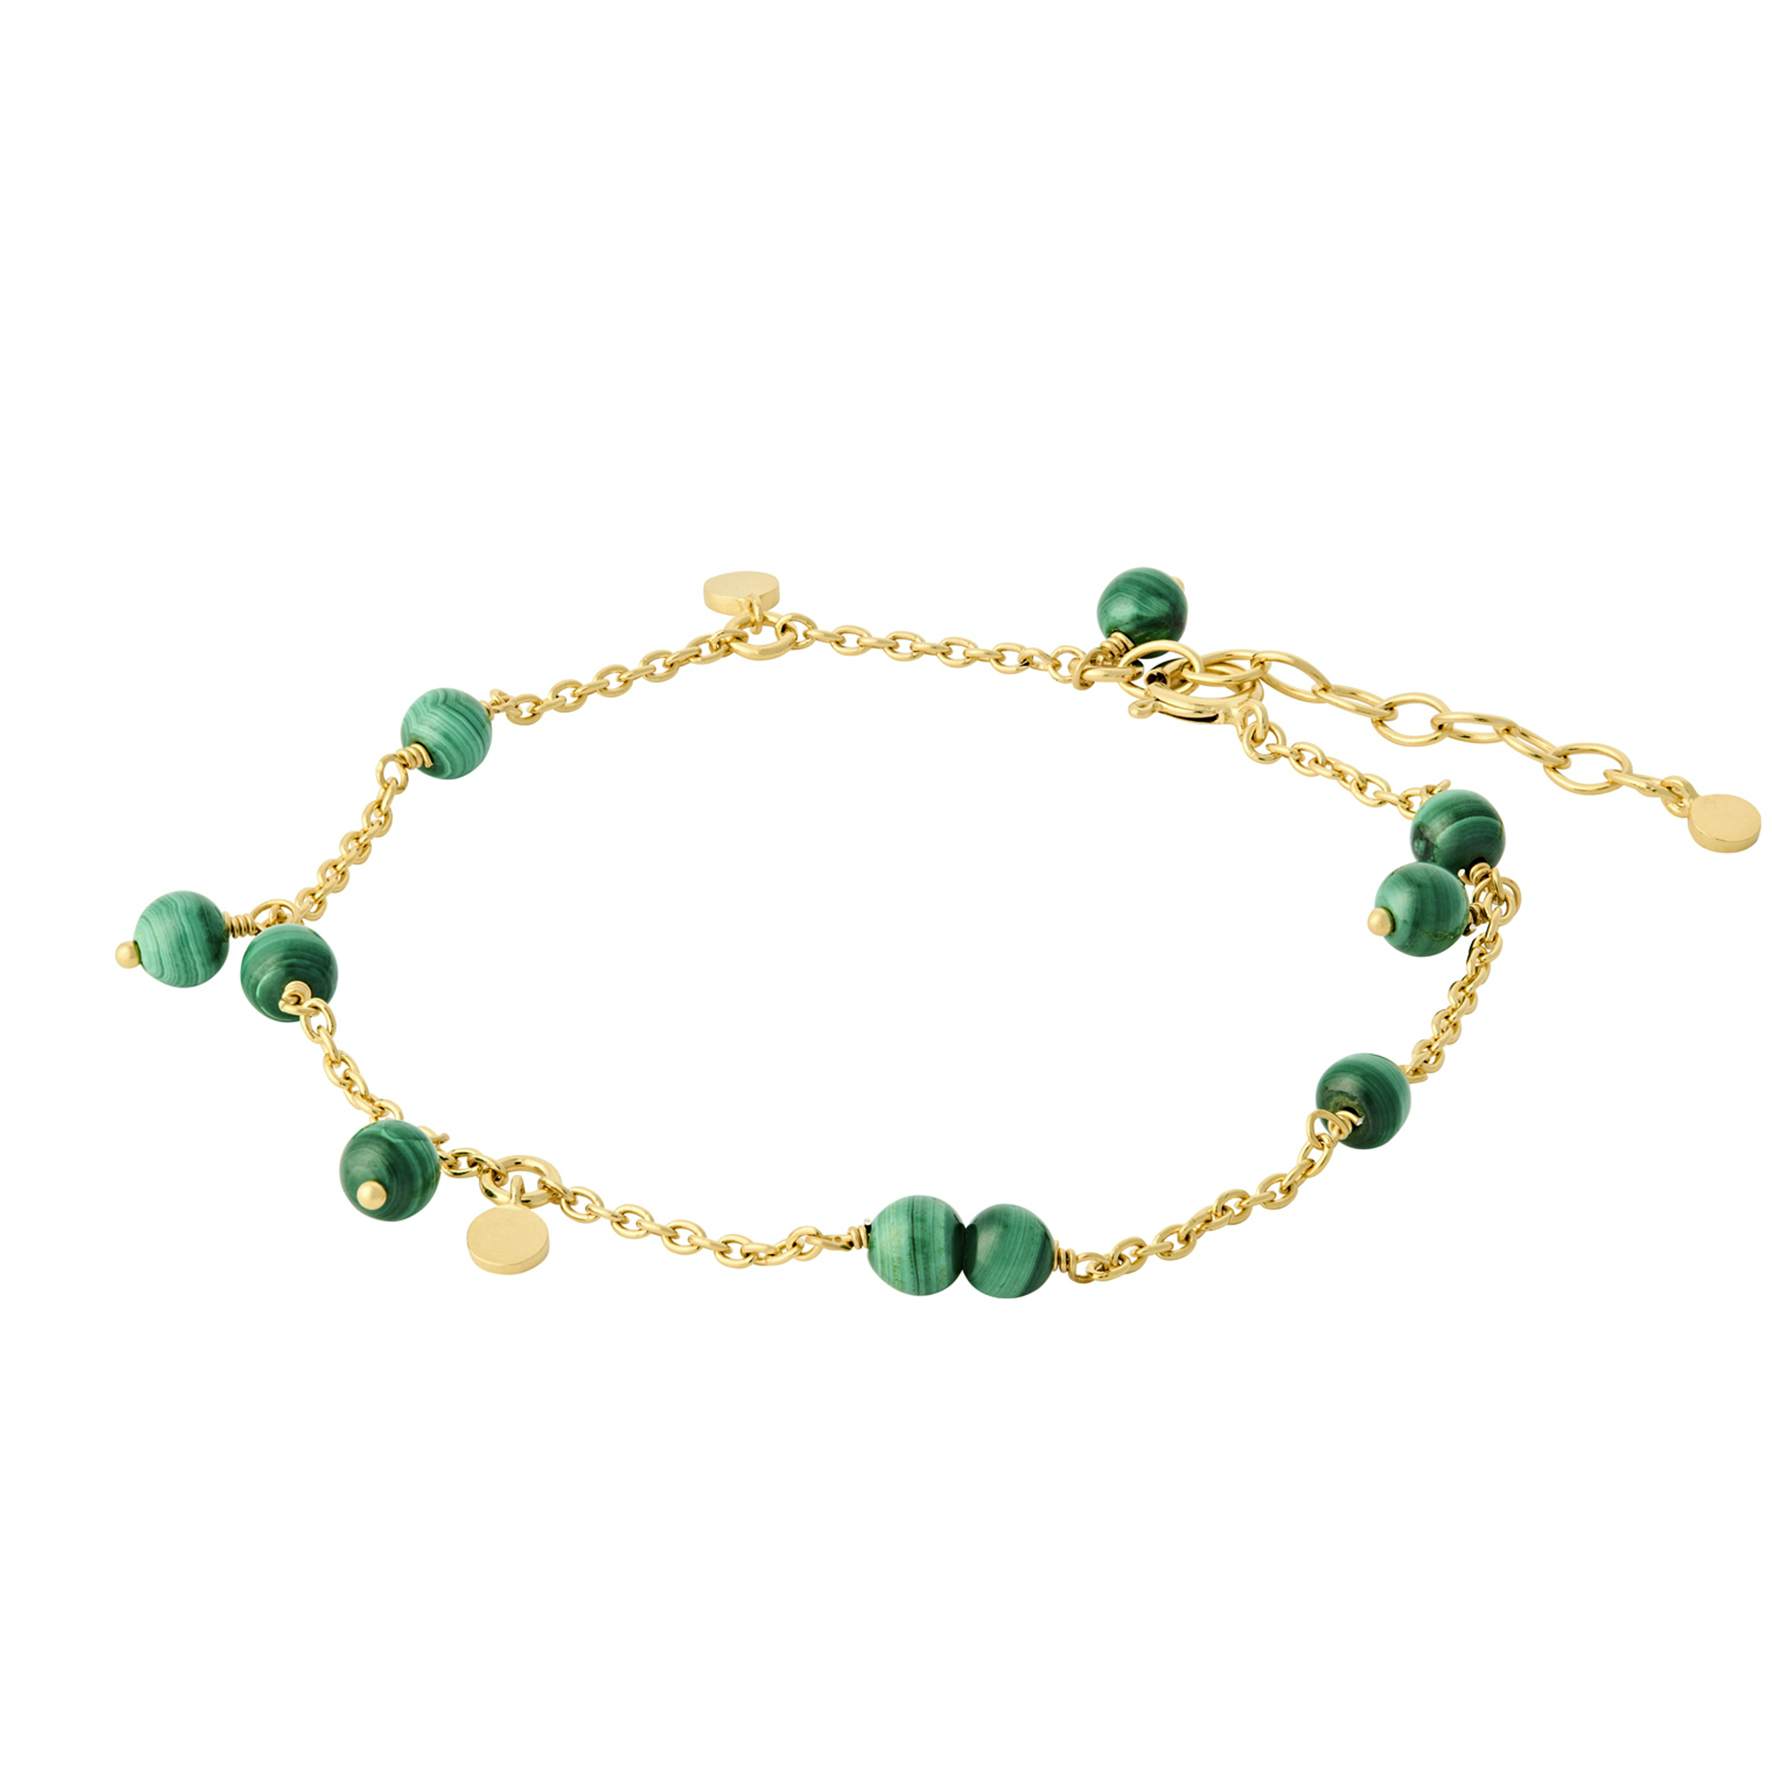 Forest Bracelet from Pernille Corydon in Goldplated-Silver Sterling 925